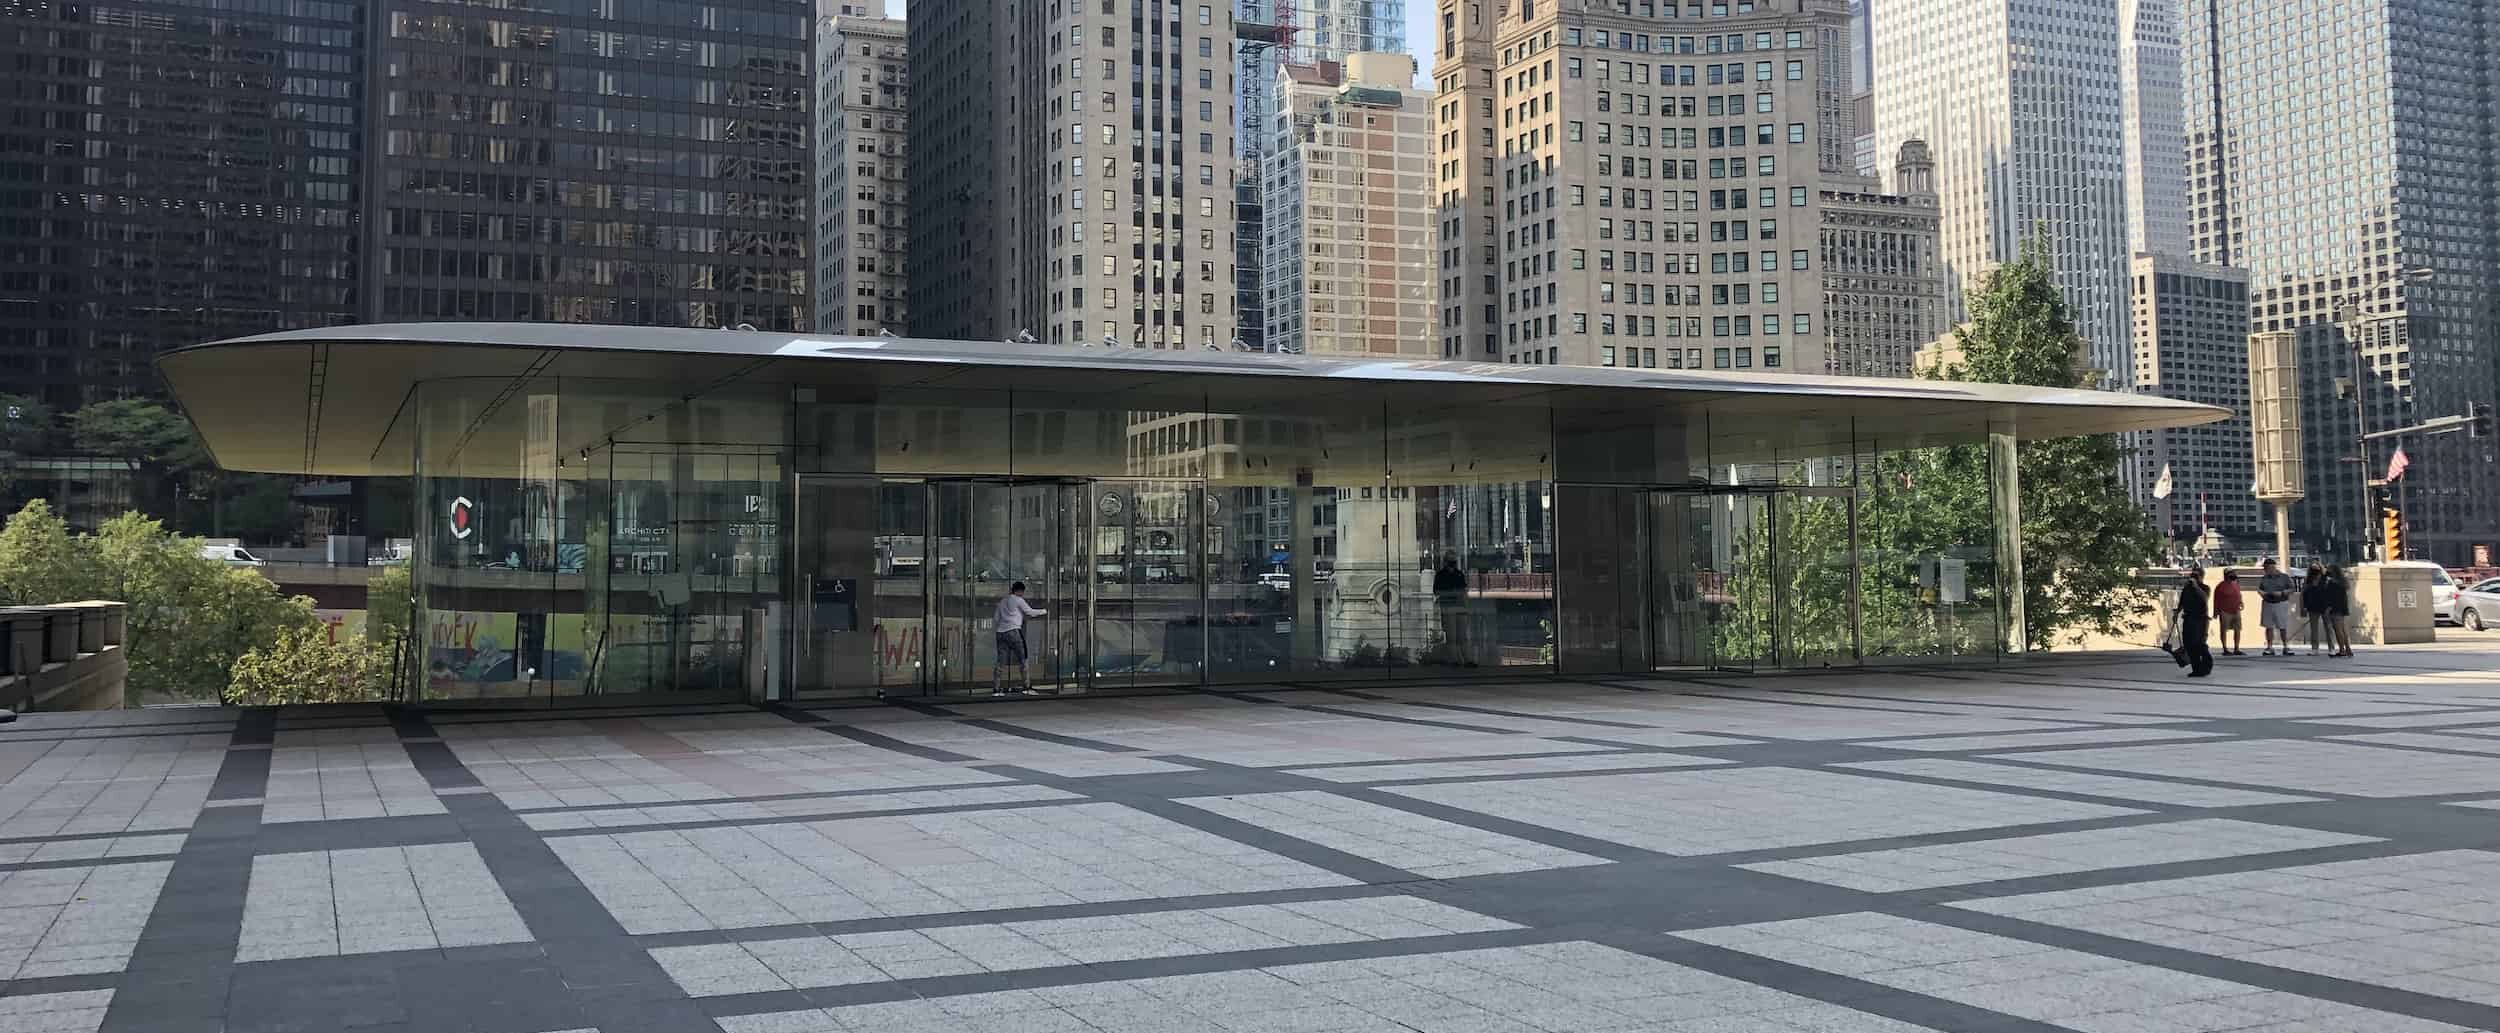 Apple Store on the Magnificent Mile in Chicago, Illinois